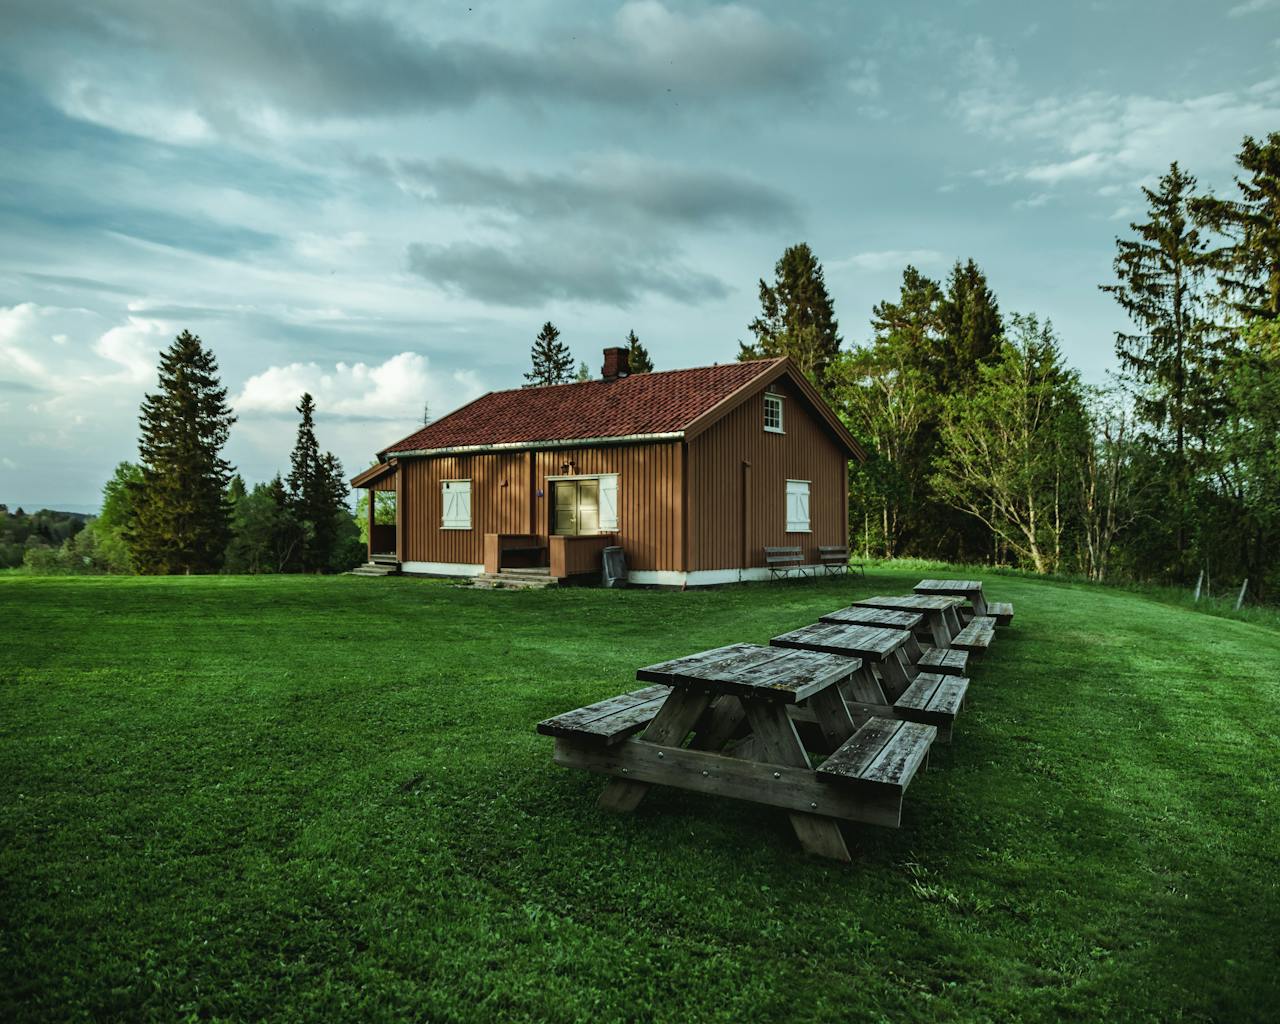 Brown wooden house near trees. Seating areas. Image by Pexels